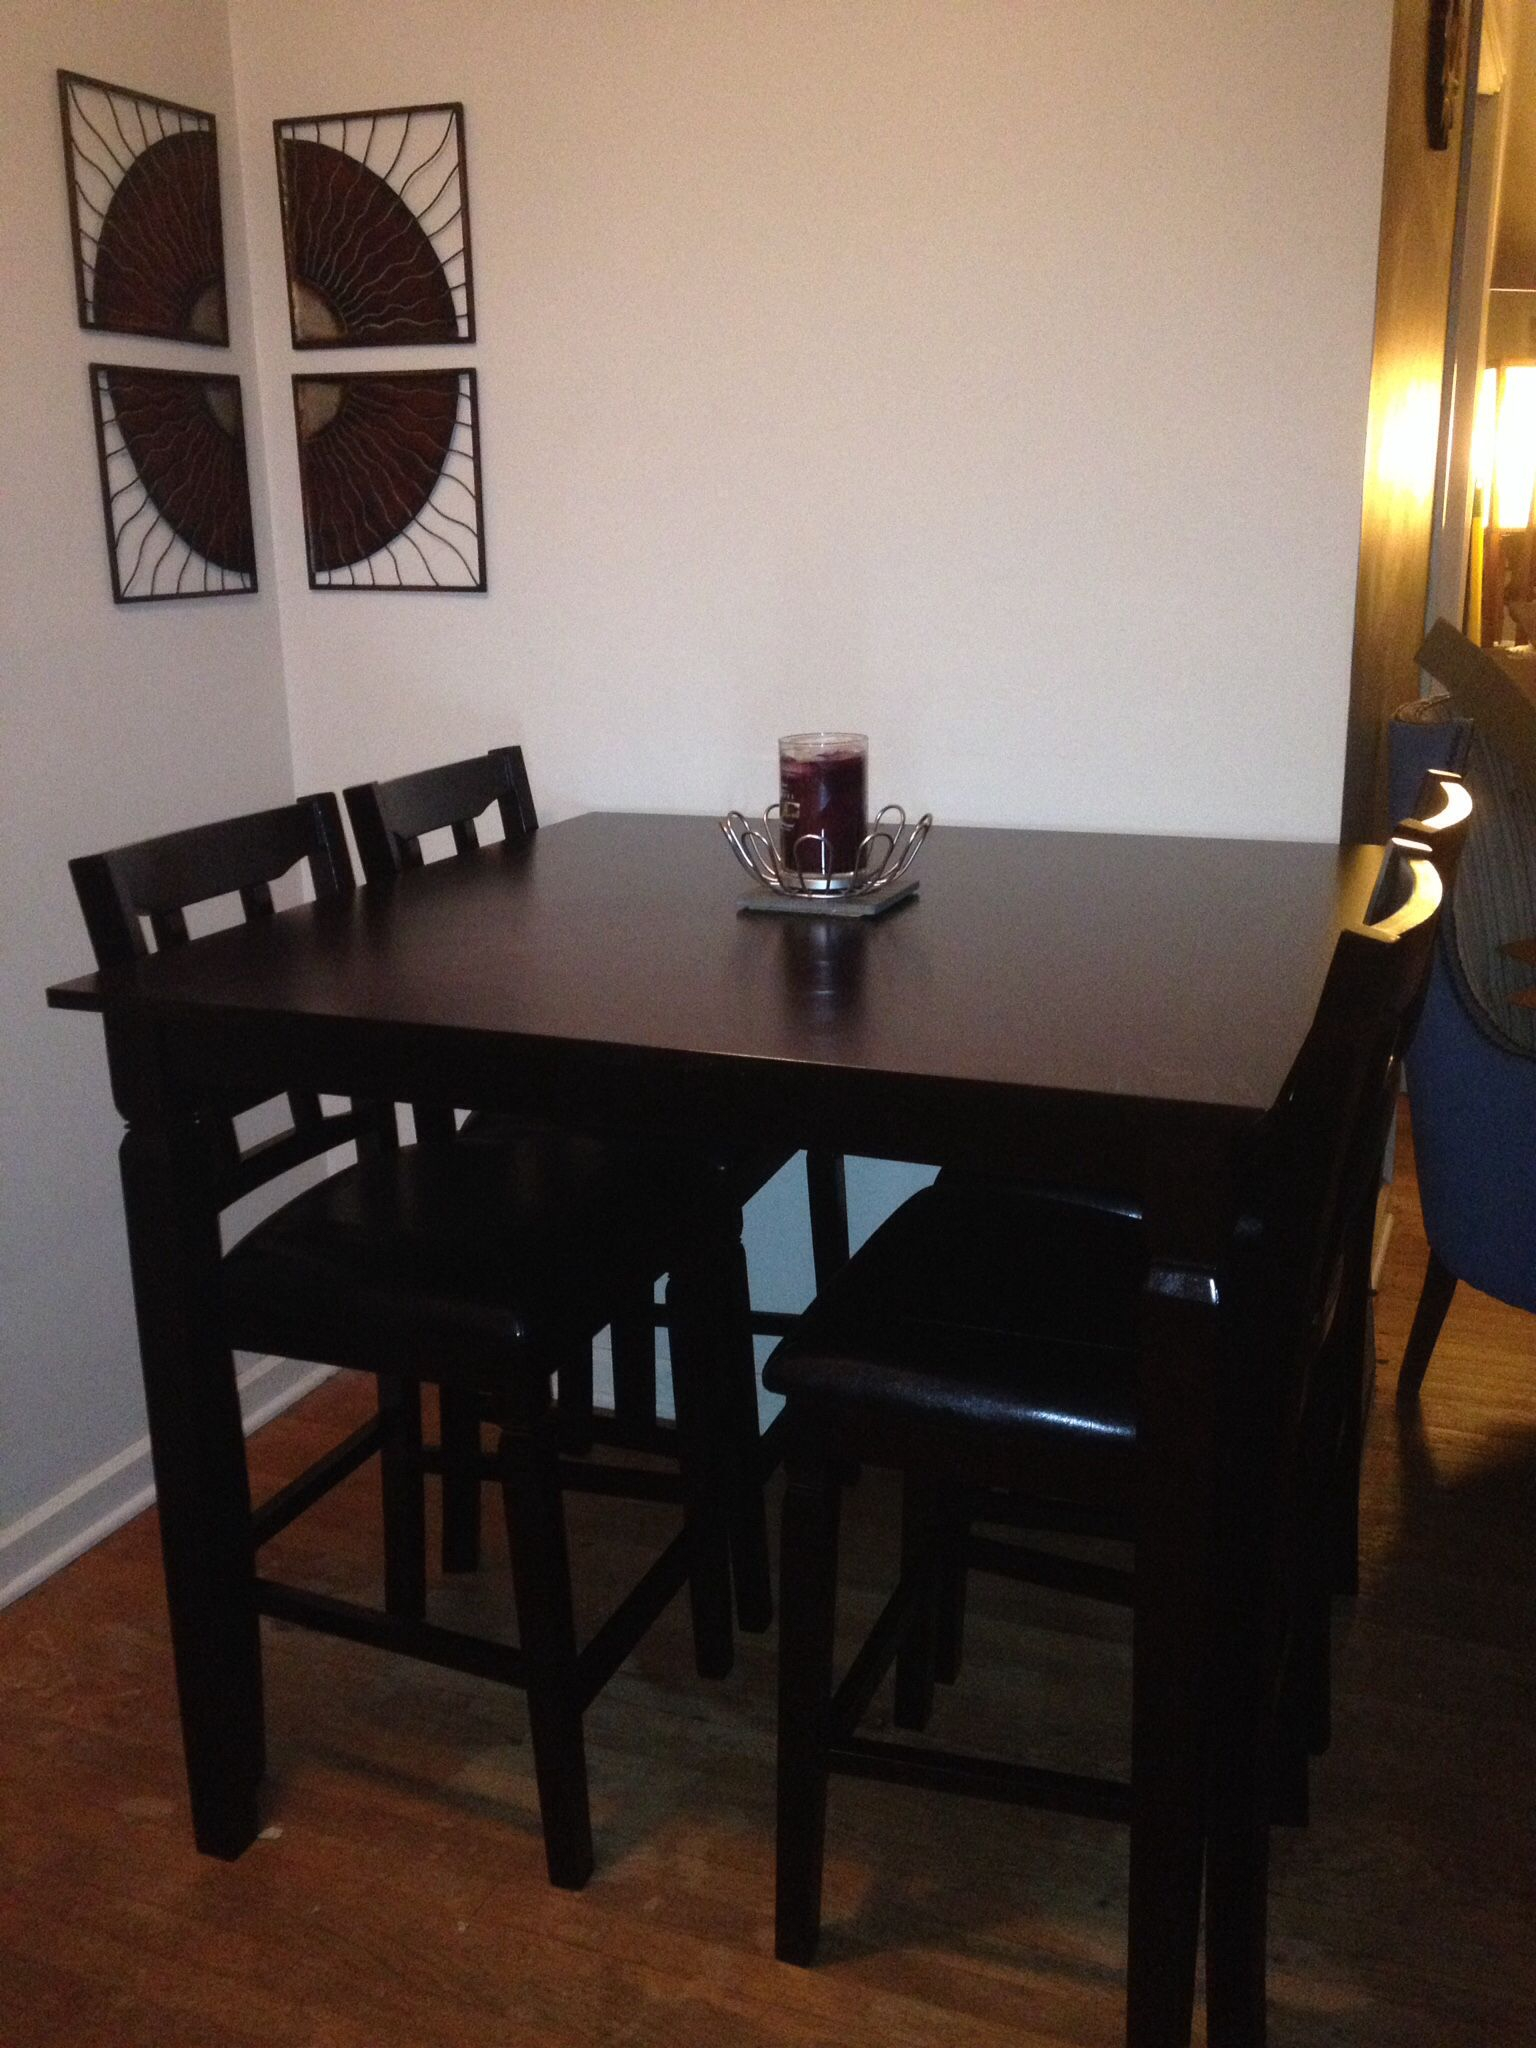 Espresso Pub Table And Chairs From Big Lots Works Great In in size 1536 X 2048